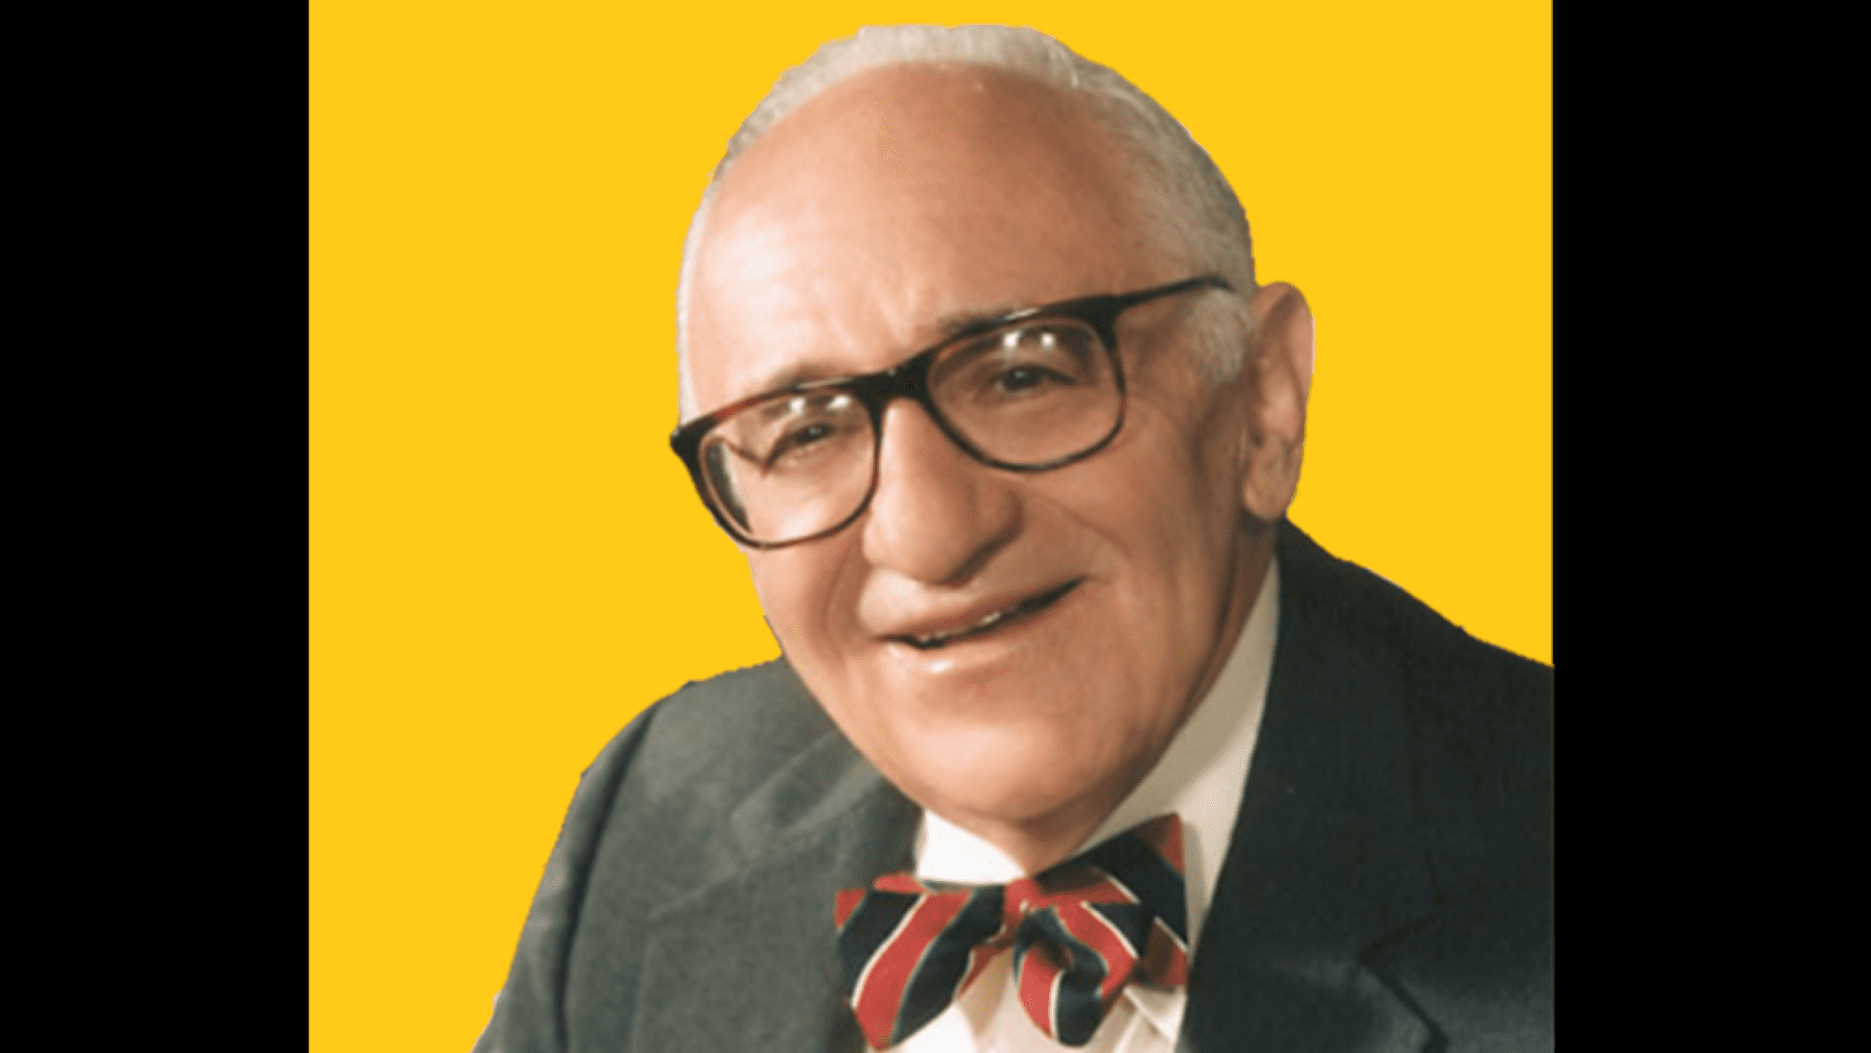 Across his many political coalitions, Murray Rothbard remained steadfast in his opposition to war and to American intervention abroad.